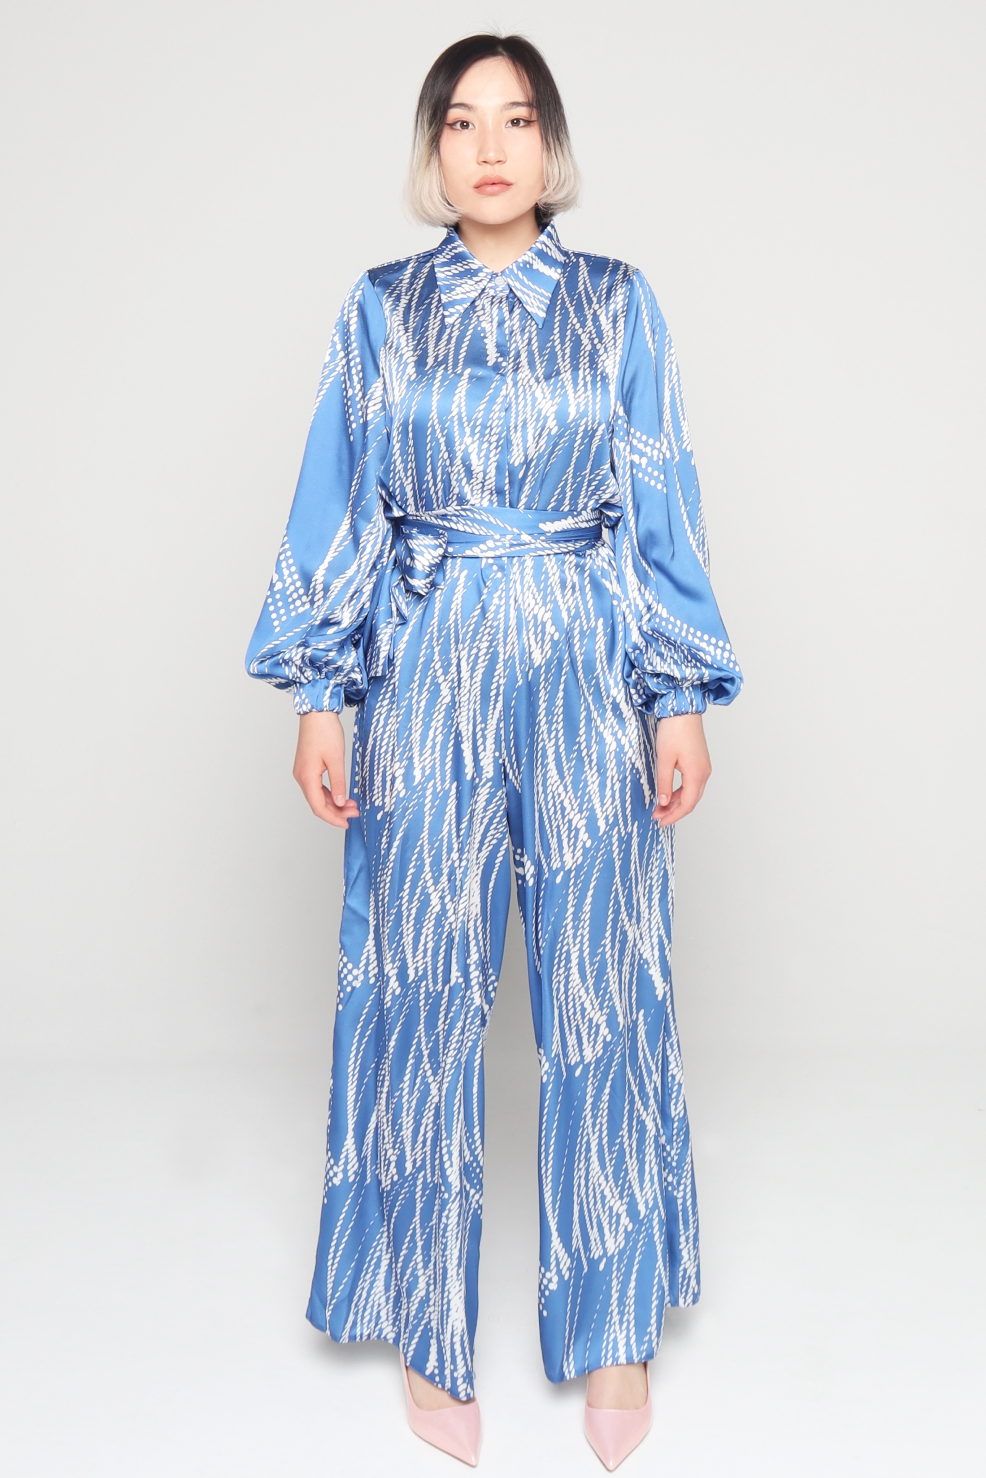 Woman wearing Blue and white collared hidden buttons side pockets elasticated balloon sleeves beautifully patterned satin Jumpsuit falls loosely through the legs with detachable belt A perfect Tznius style summer outfit for women